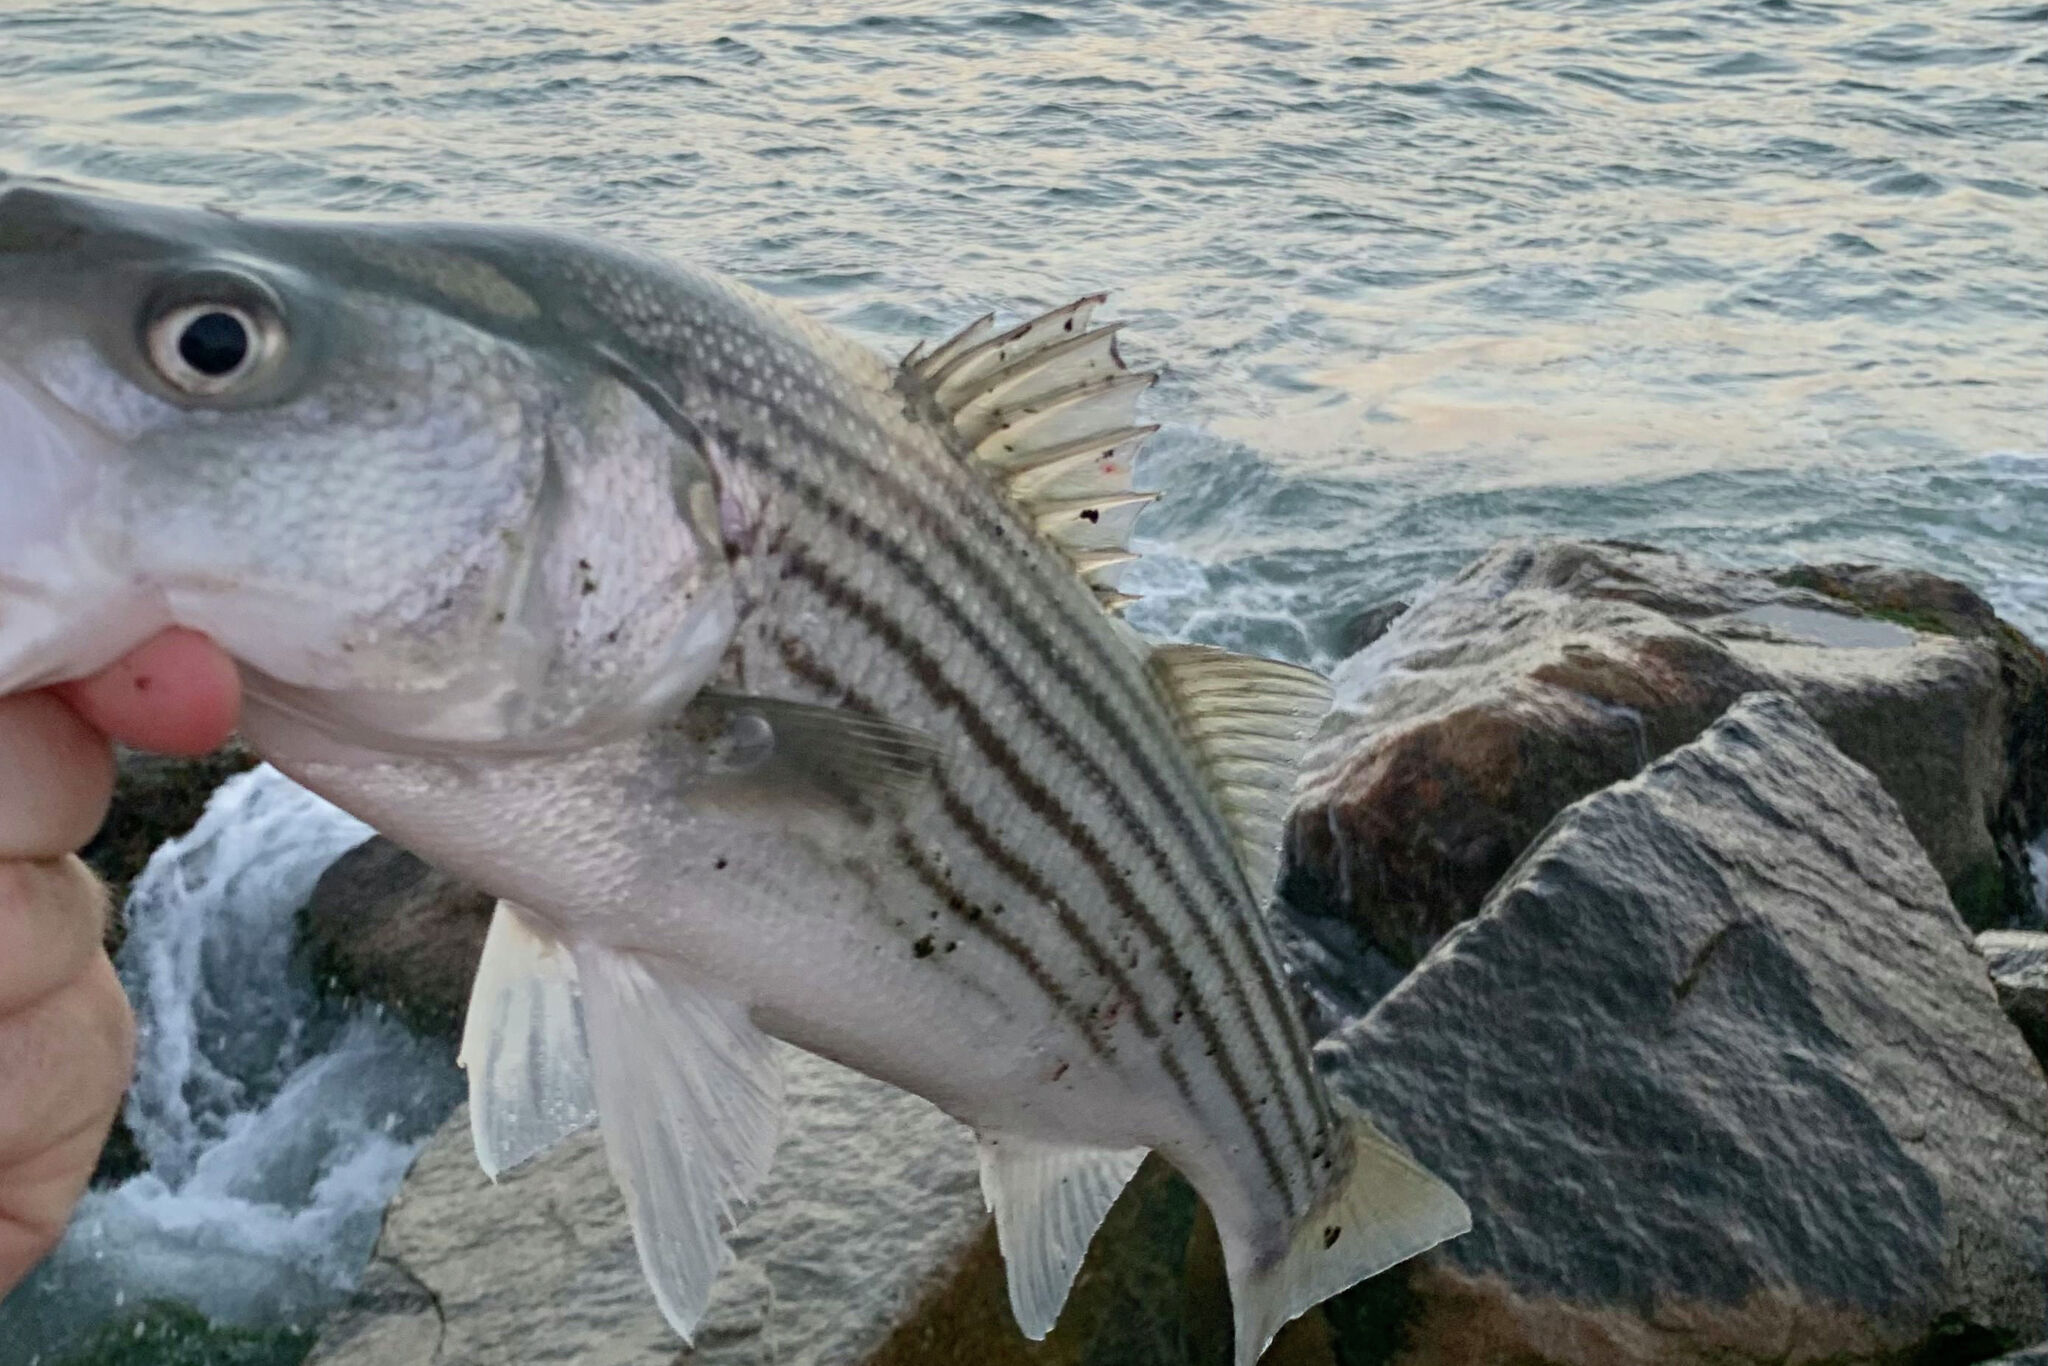 Where to Catch Striped Bass